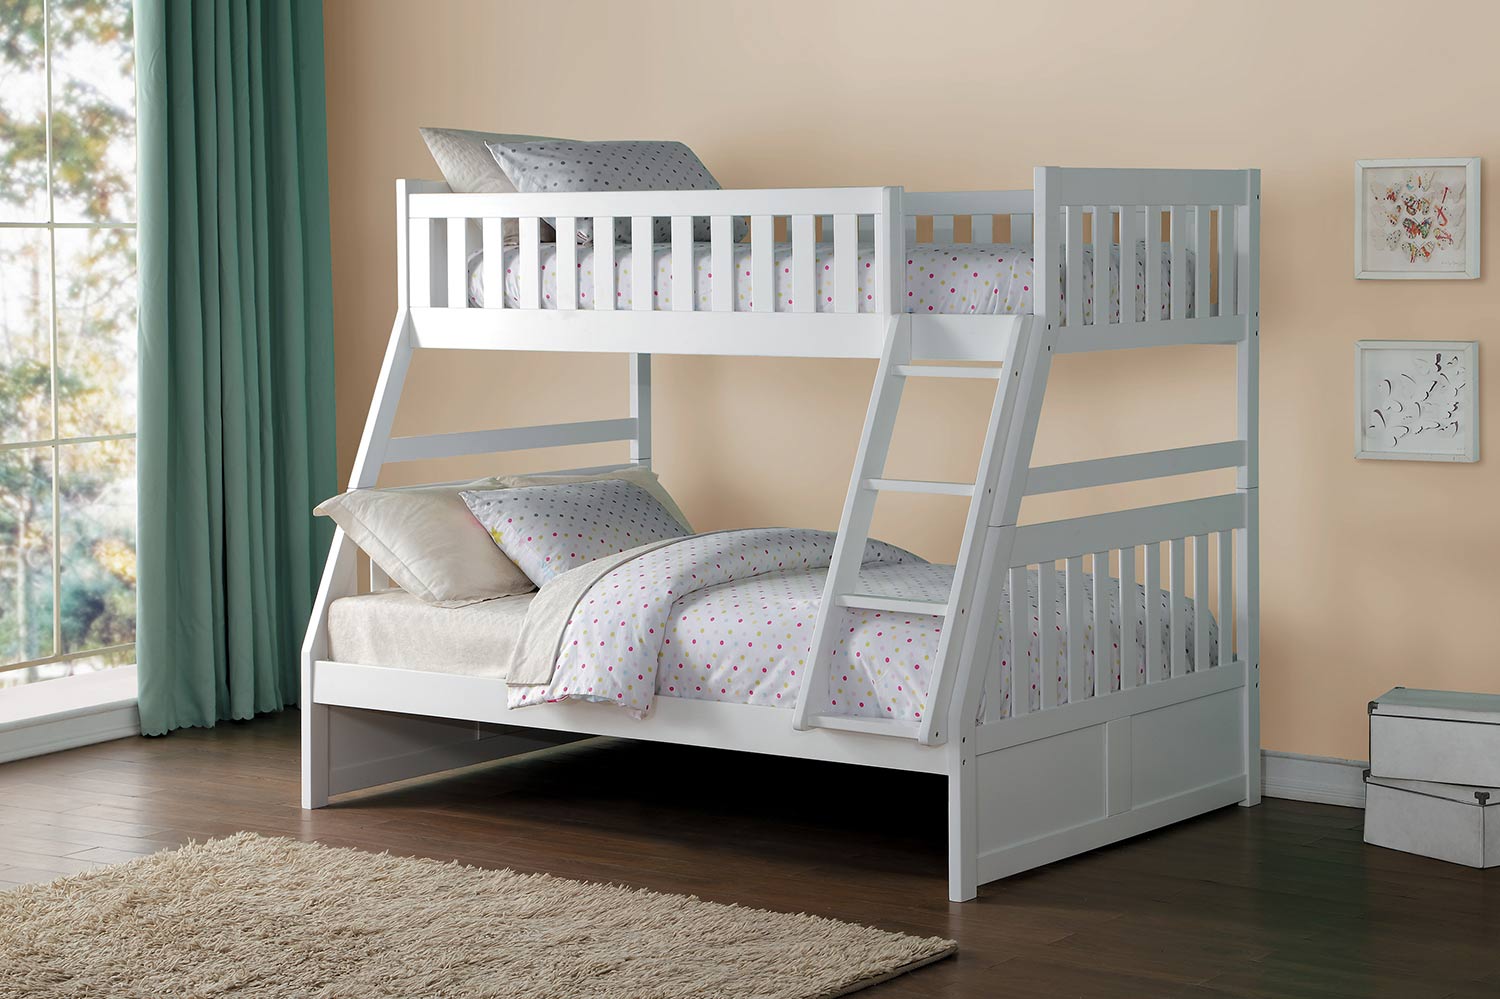 Homelegance Galen Twin over Full Bunk Bed - White